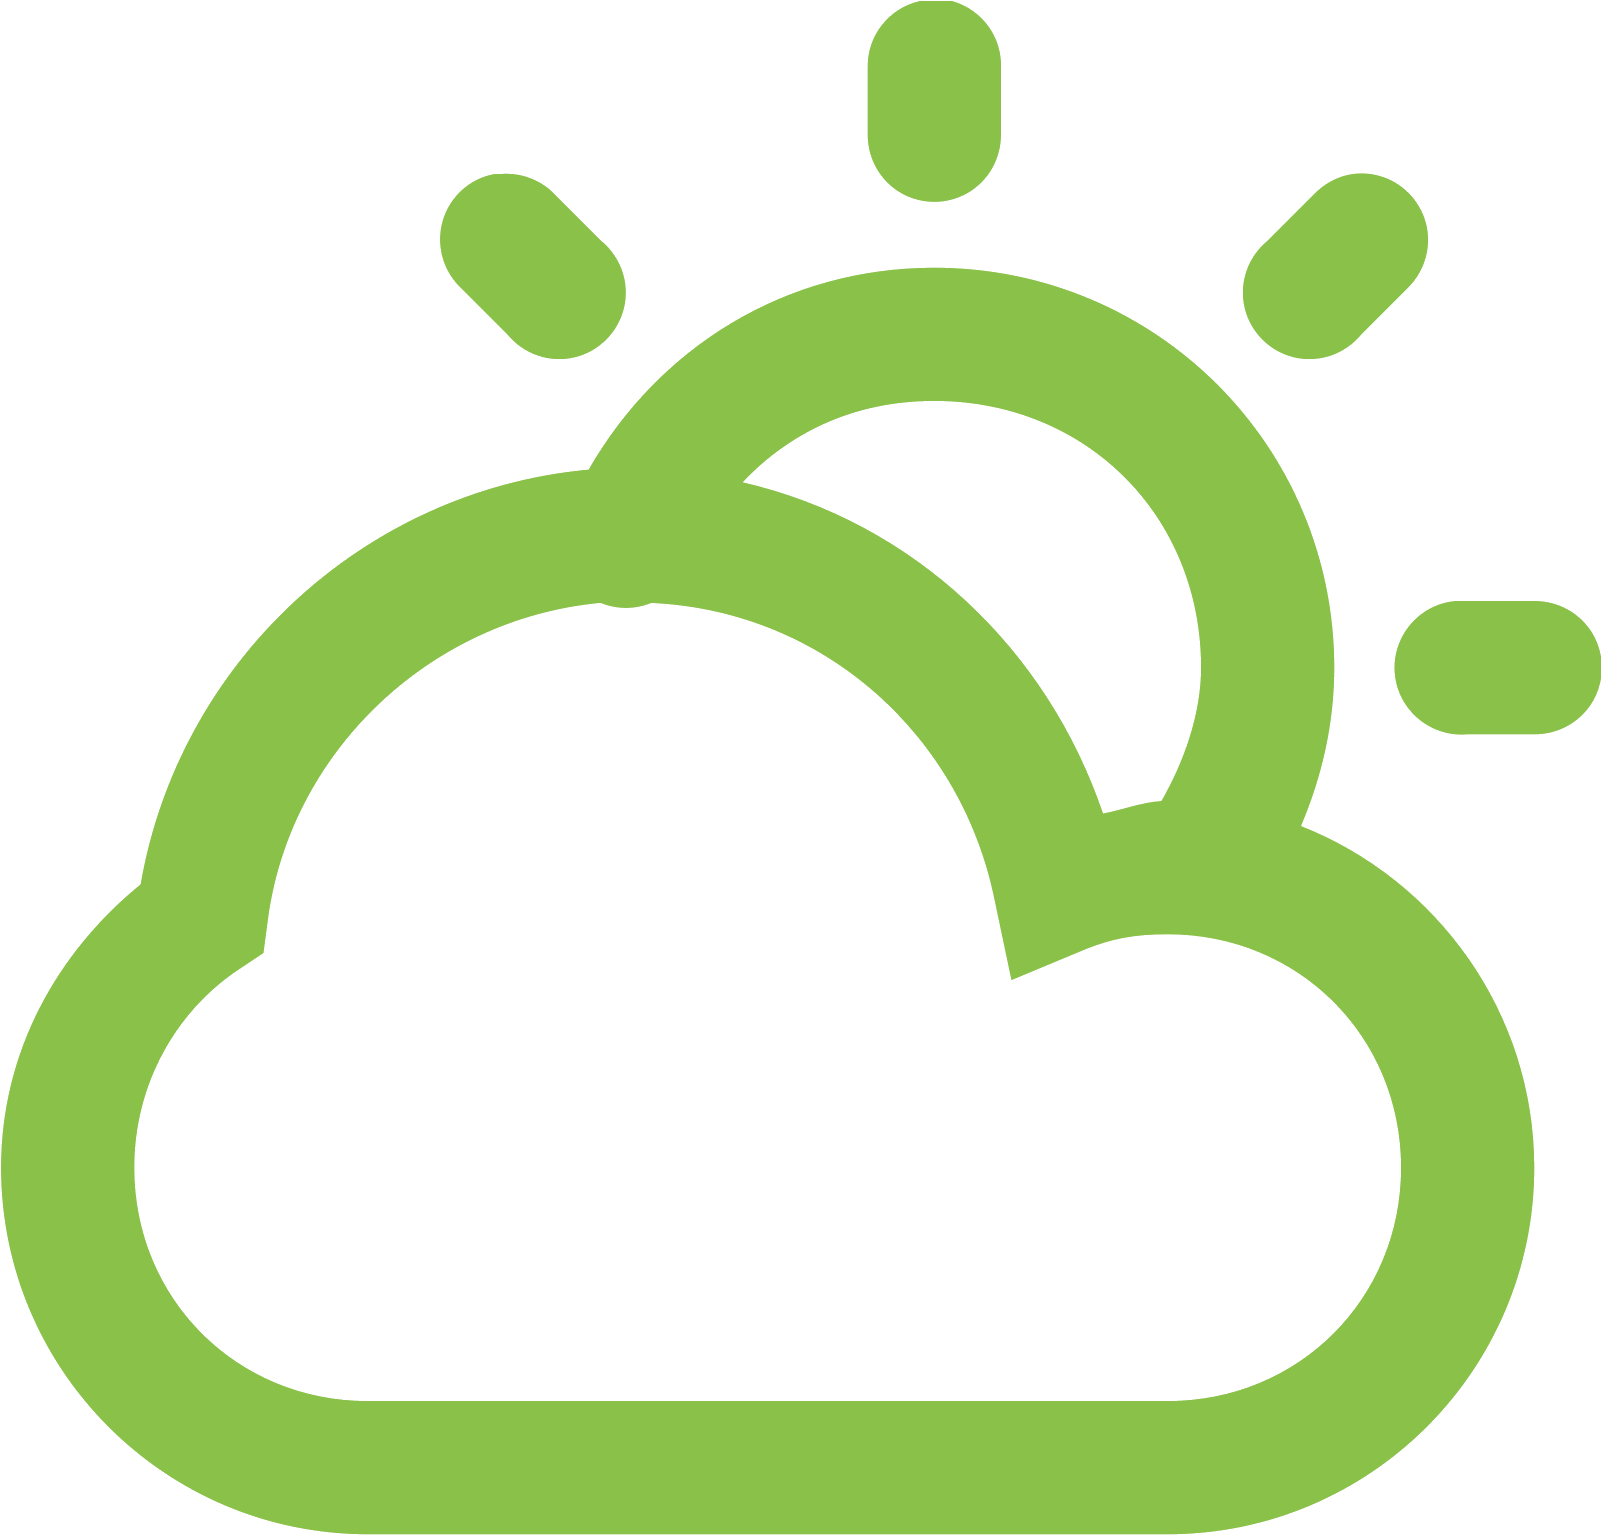 Partly Sunny Icon Download - Partly Cloudy Icon (1600x1600)